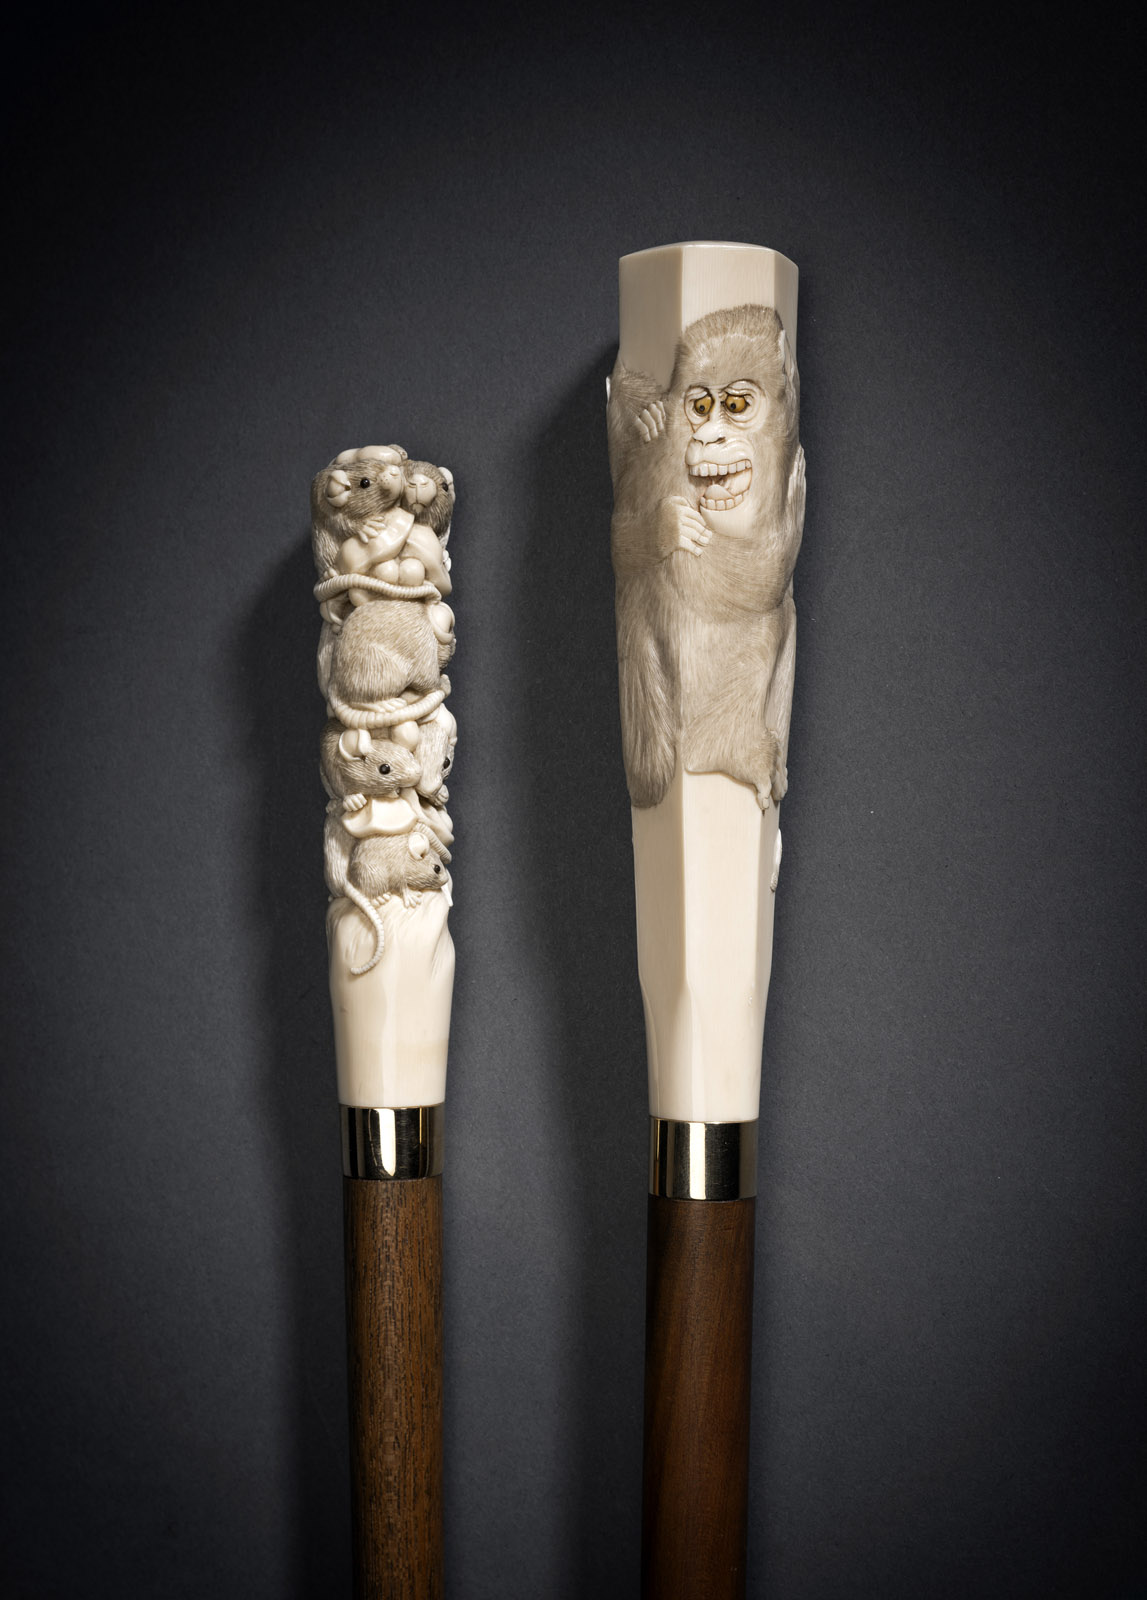 <b>TWO WOODEN STAFFS WITH FINELY CARVED IVORY HANDLES DECORATED WITH RATS AND MONKEYS</b>